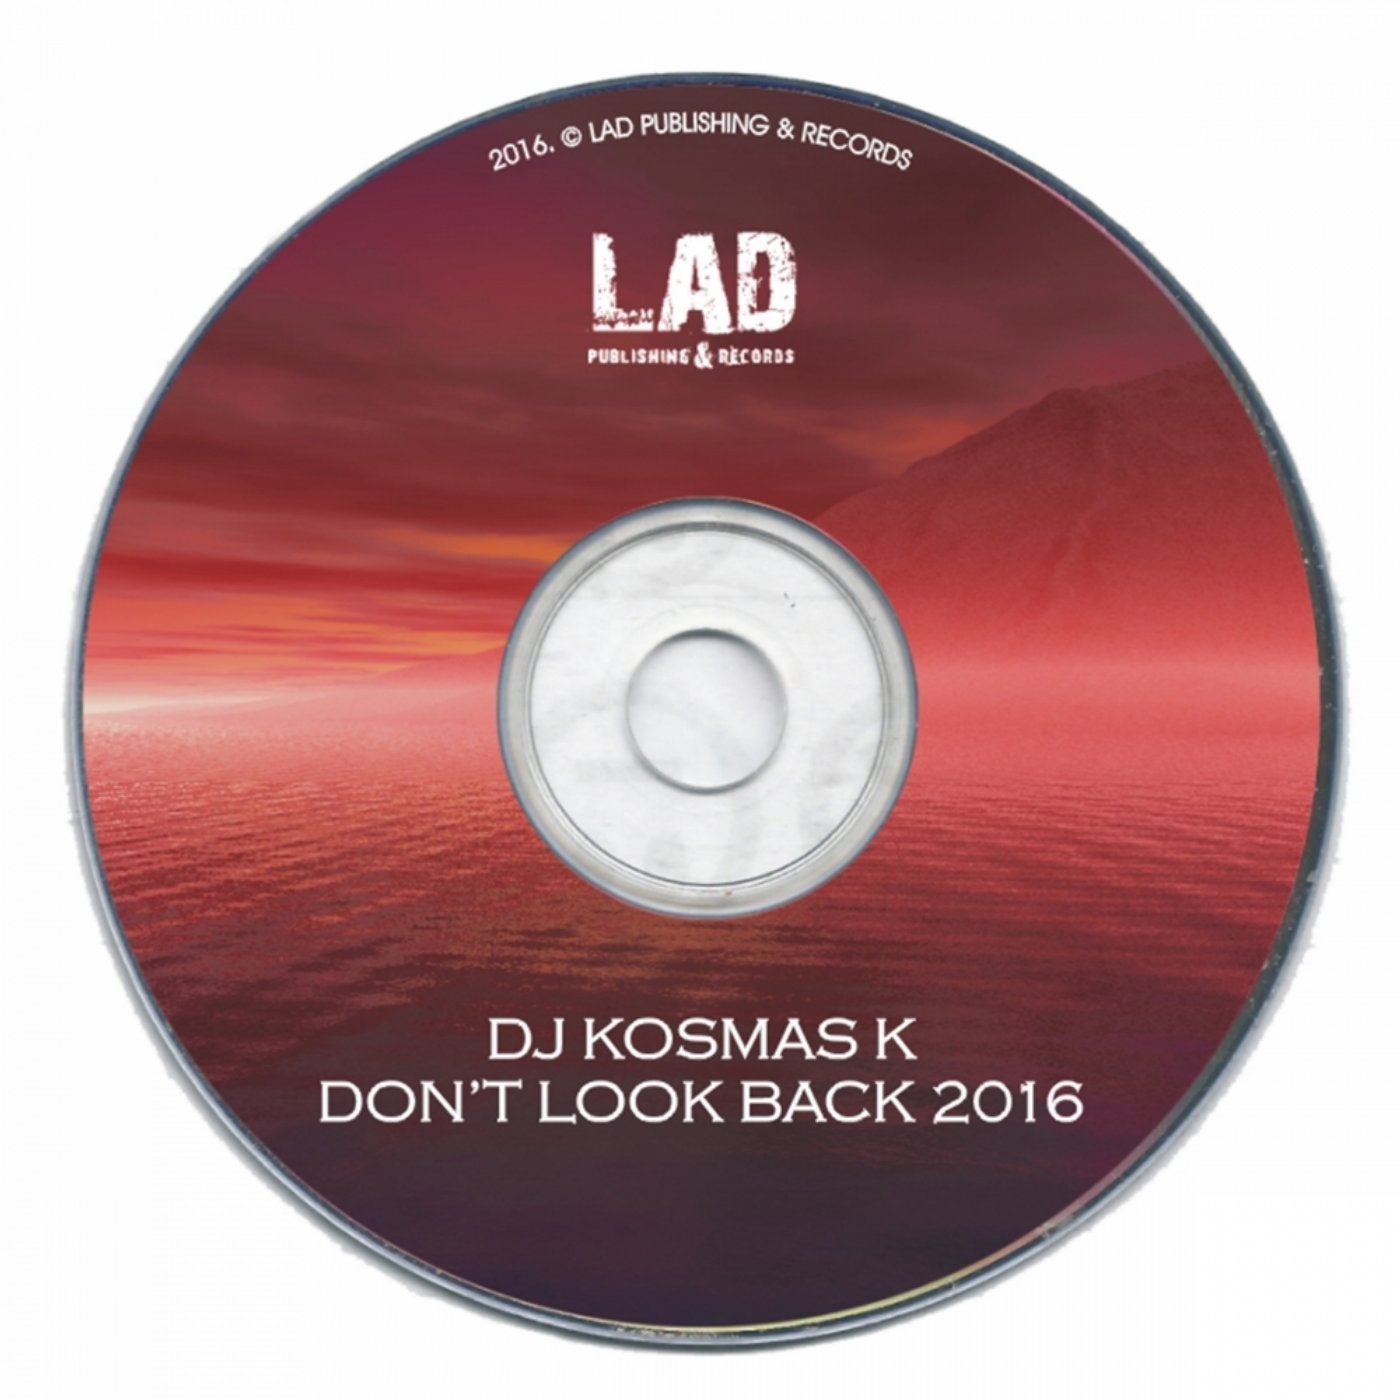 Don't Look Back 2016 (2016 Remix)